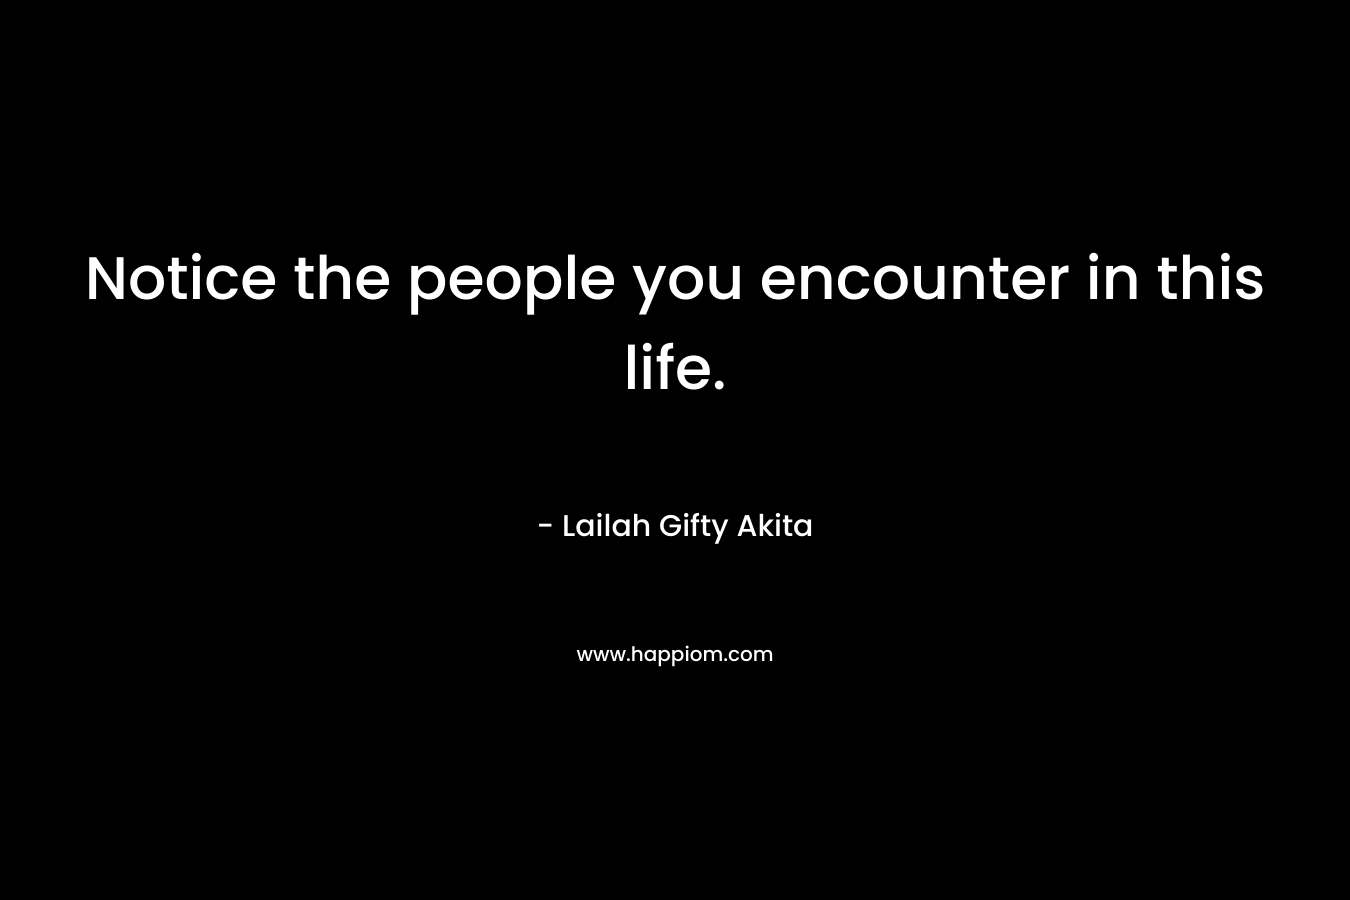 Notice the people you encounter in this life.